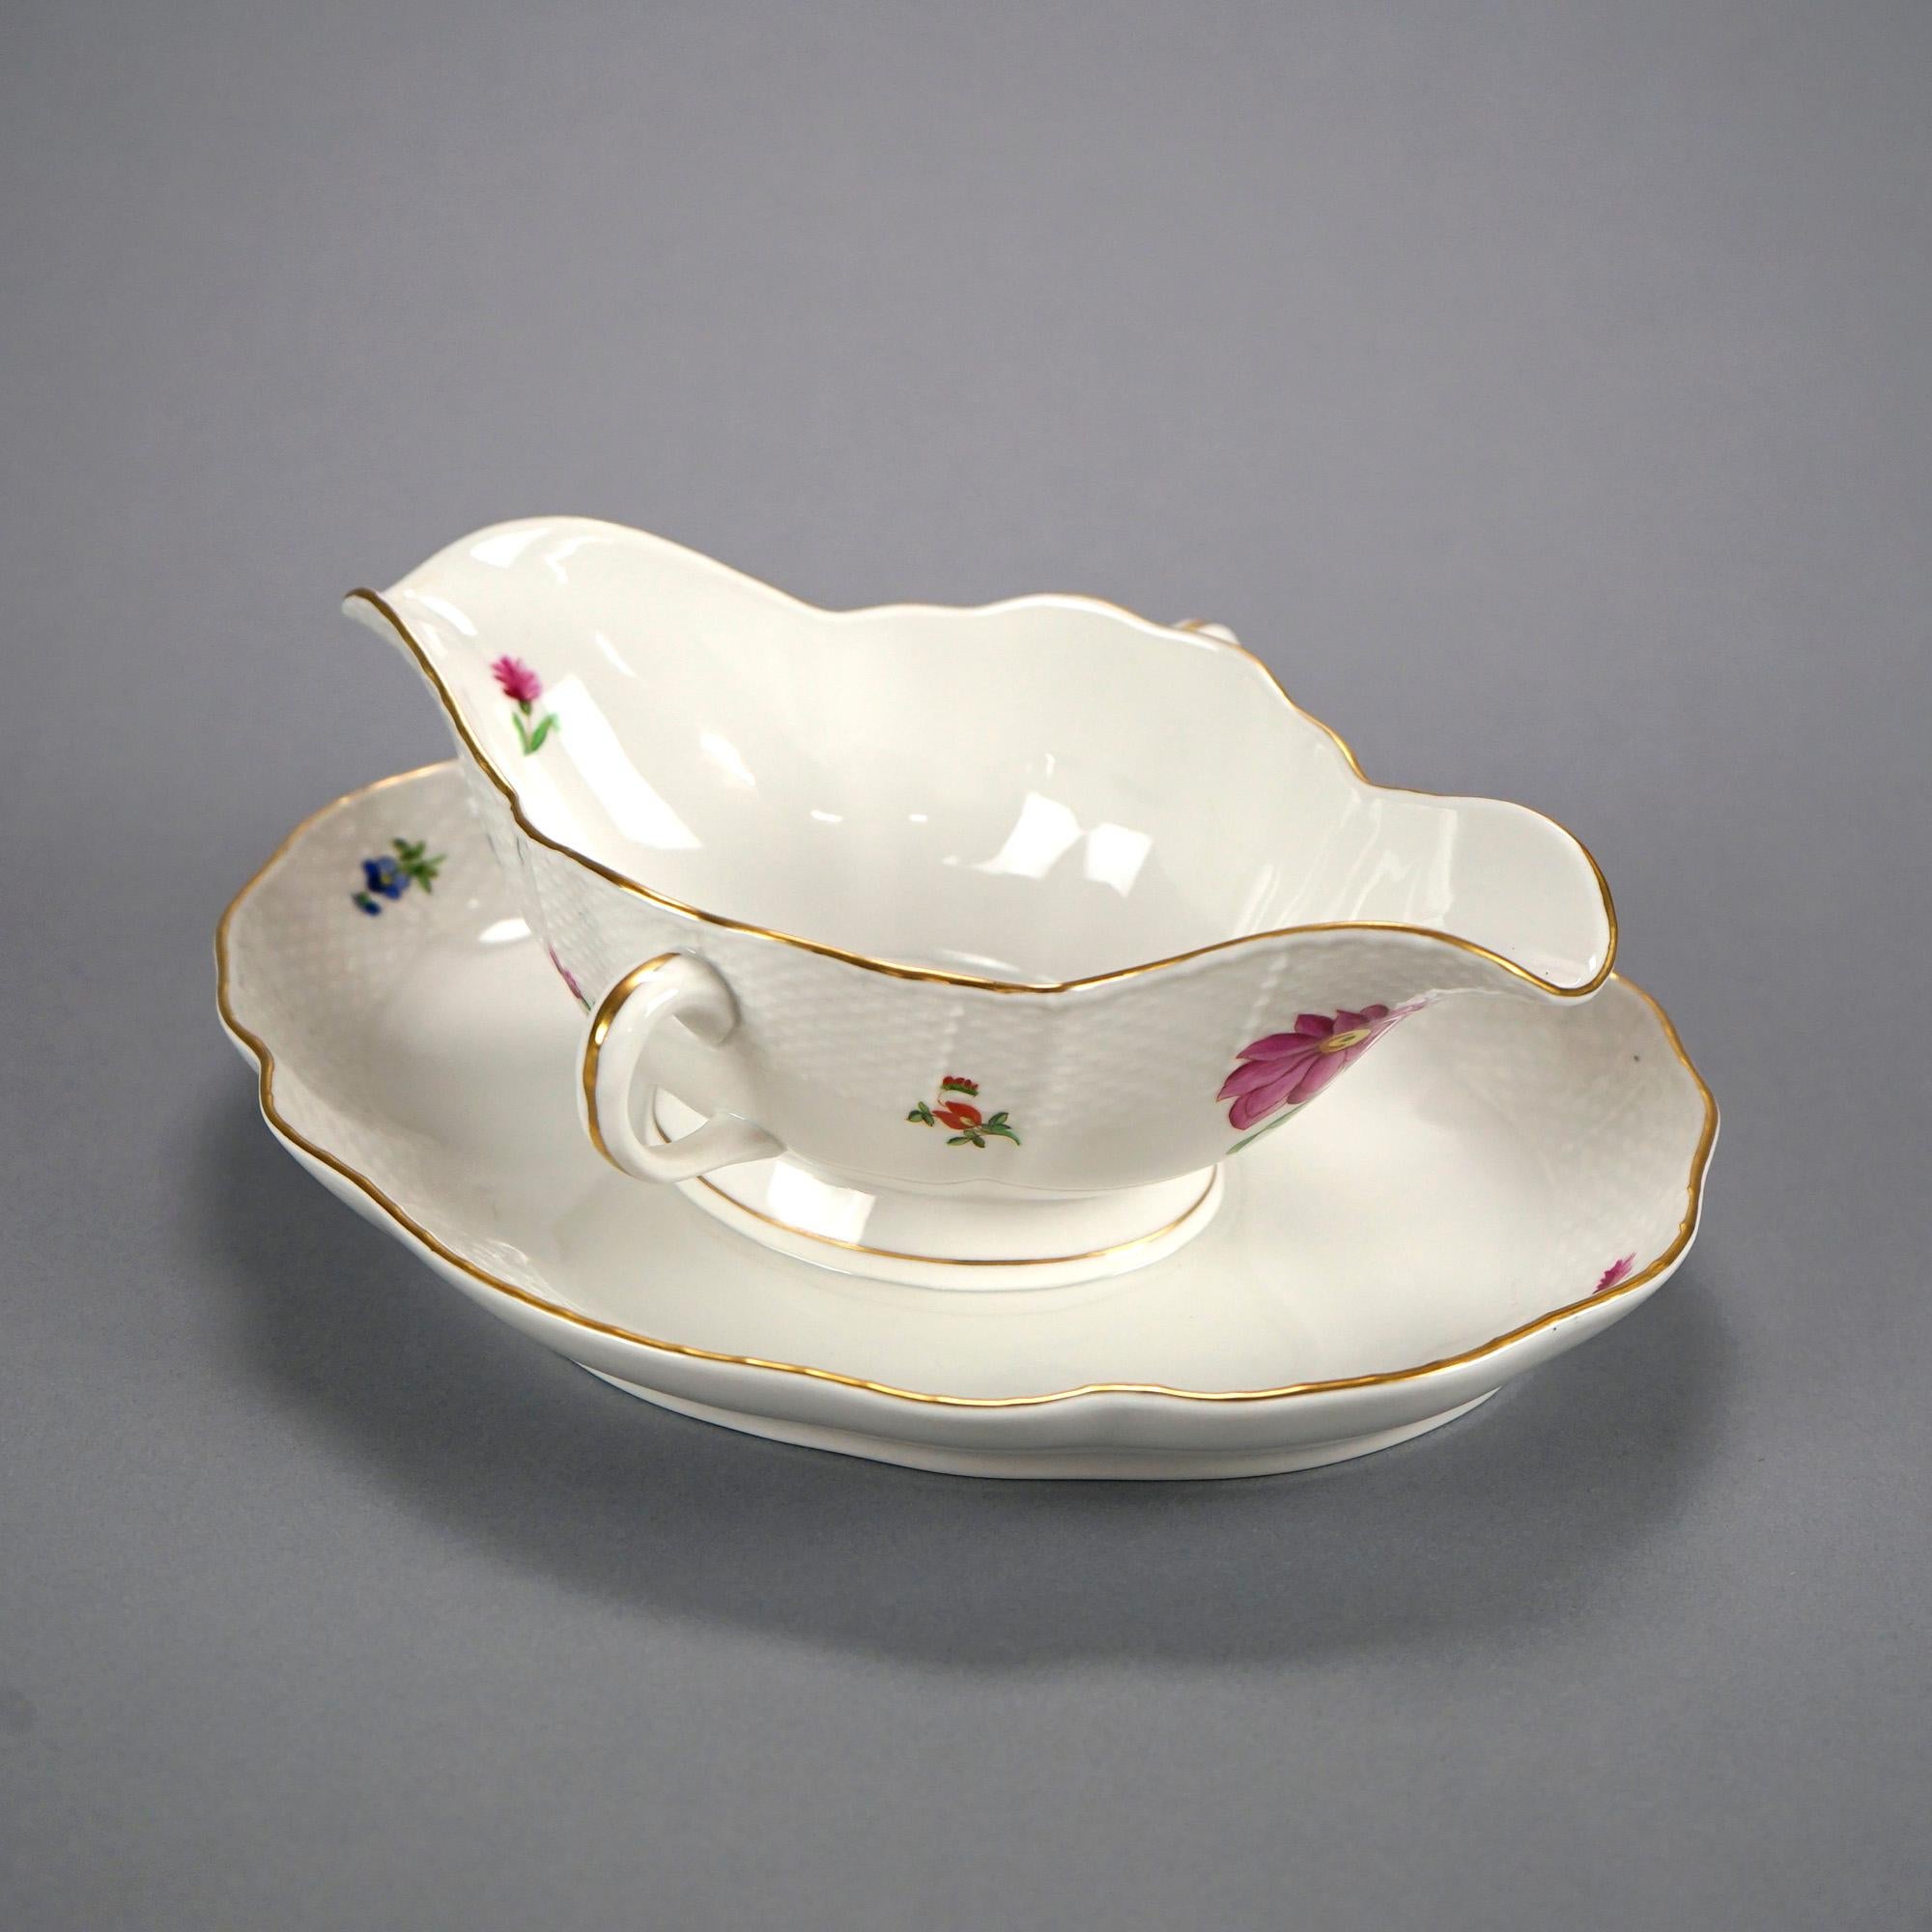 20th Century Herend Porcelain Double Handled Gravy Sauce Boat with Painted Flowers, 20th C For Sale